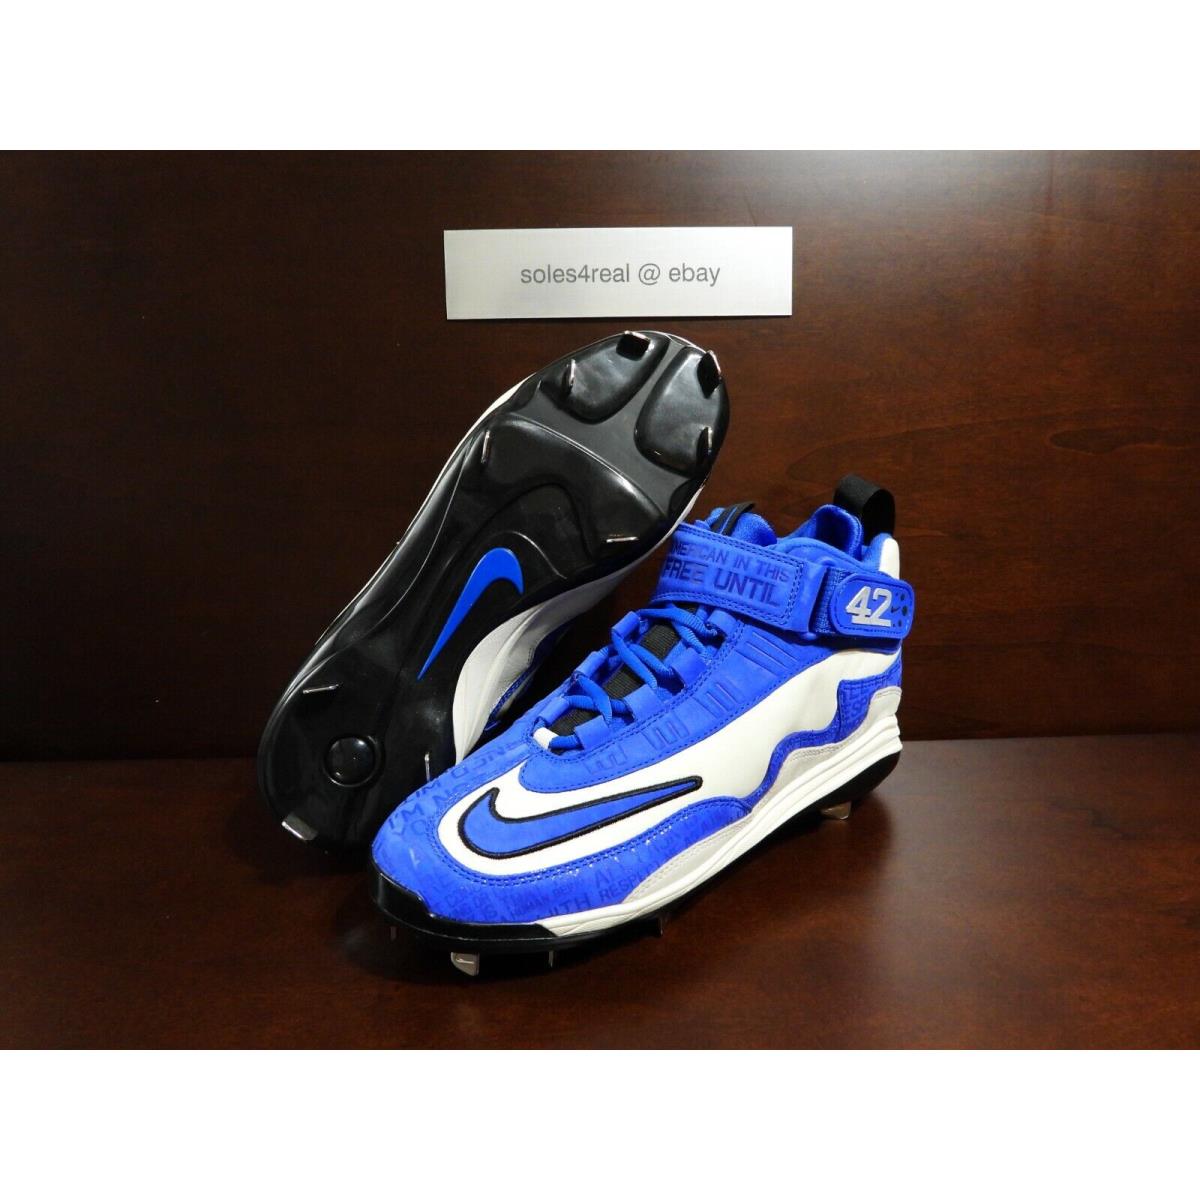 DS Nike Air Griffey 1 2022 Size 9 Jackie Robinson Max I 42 Day